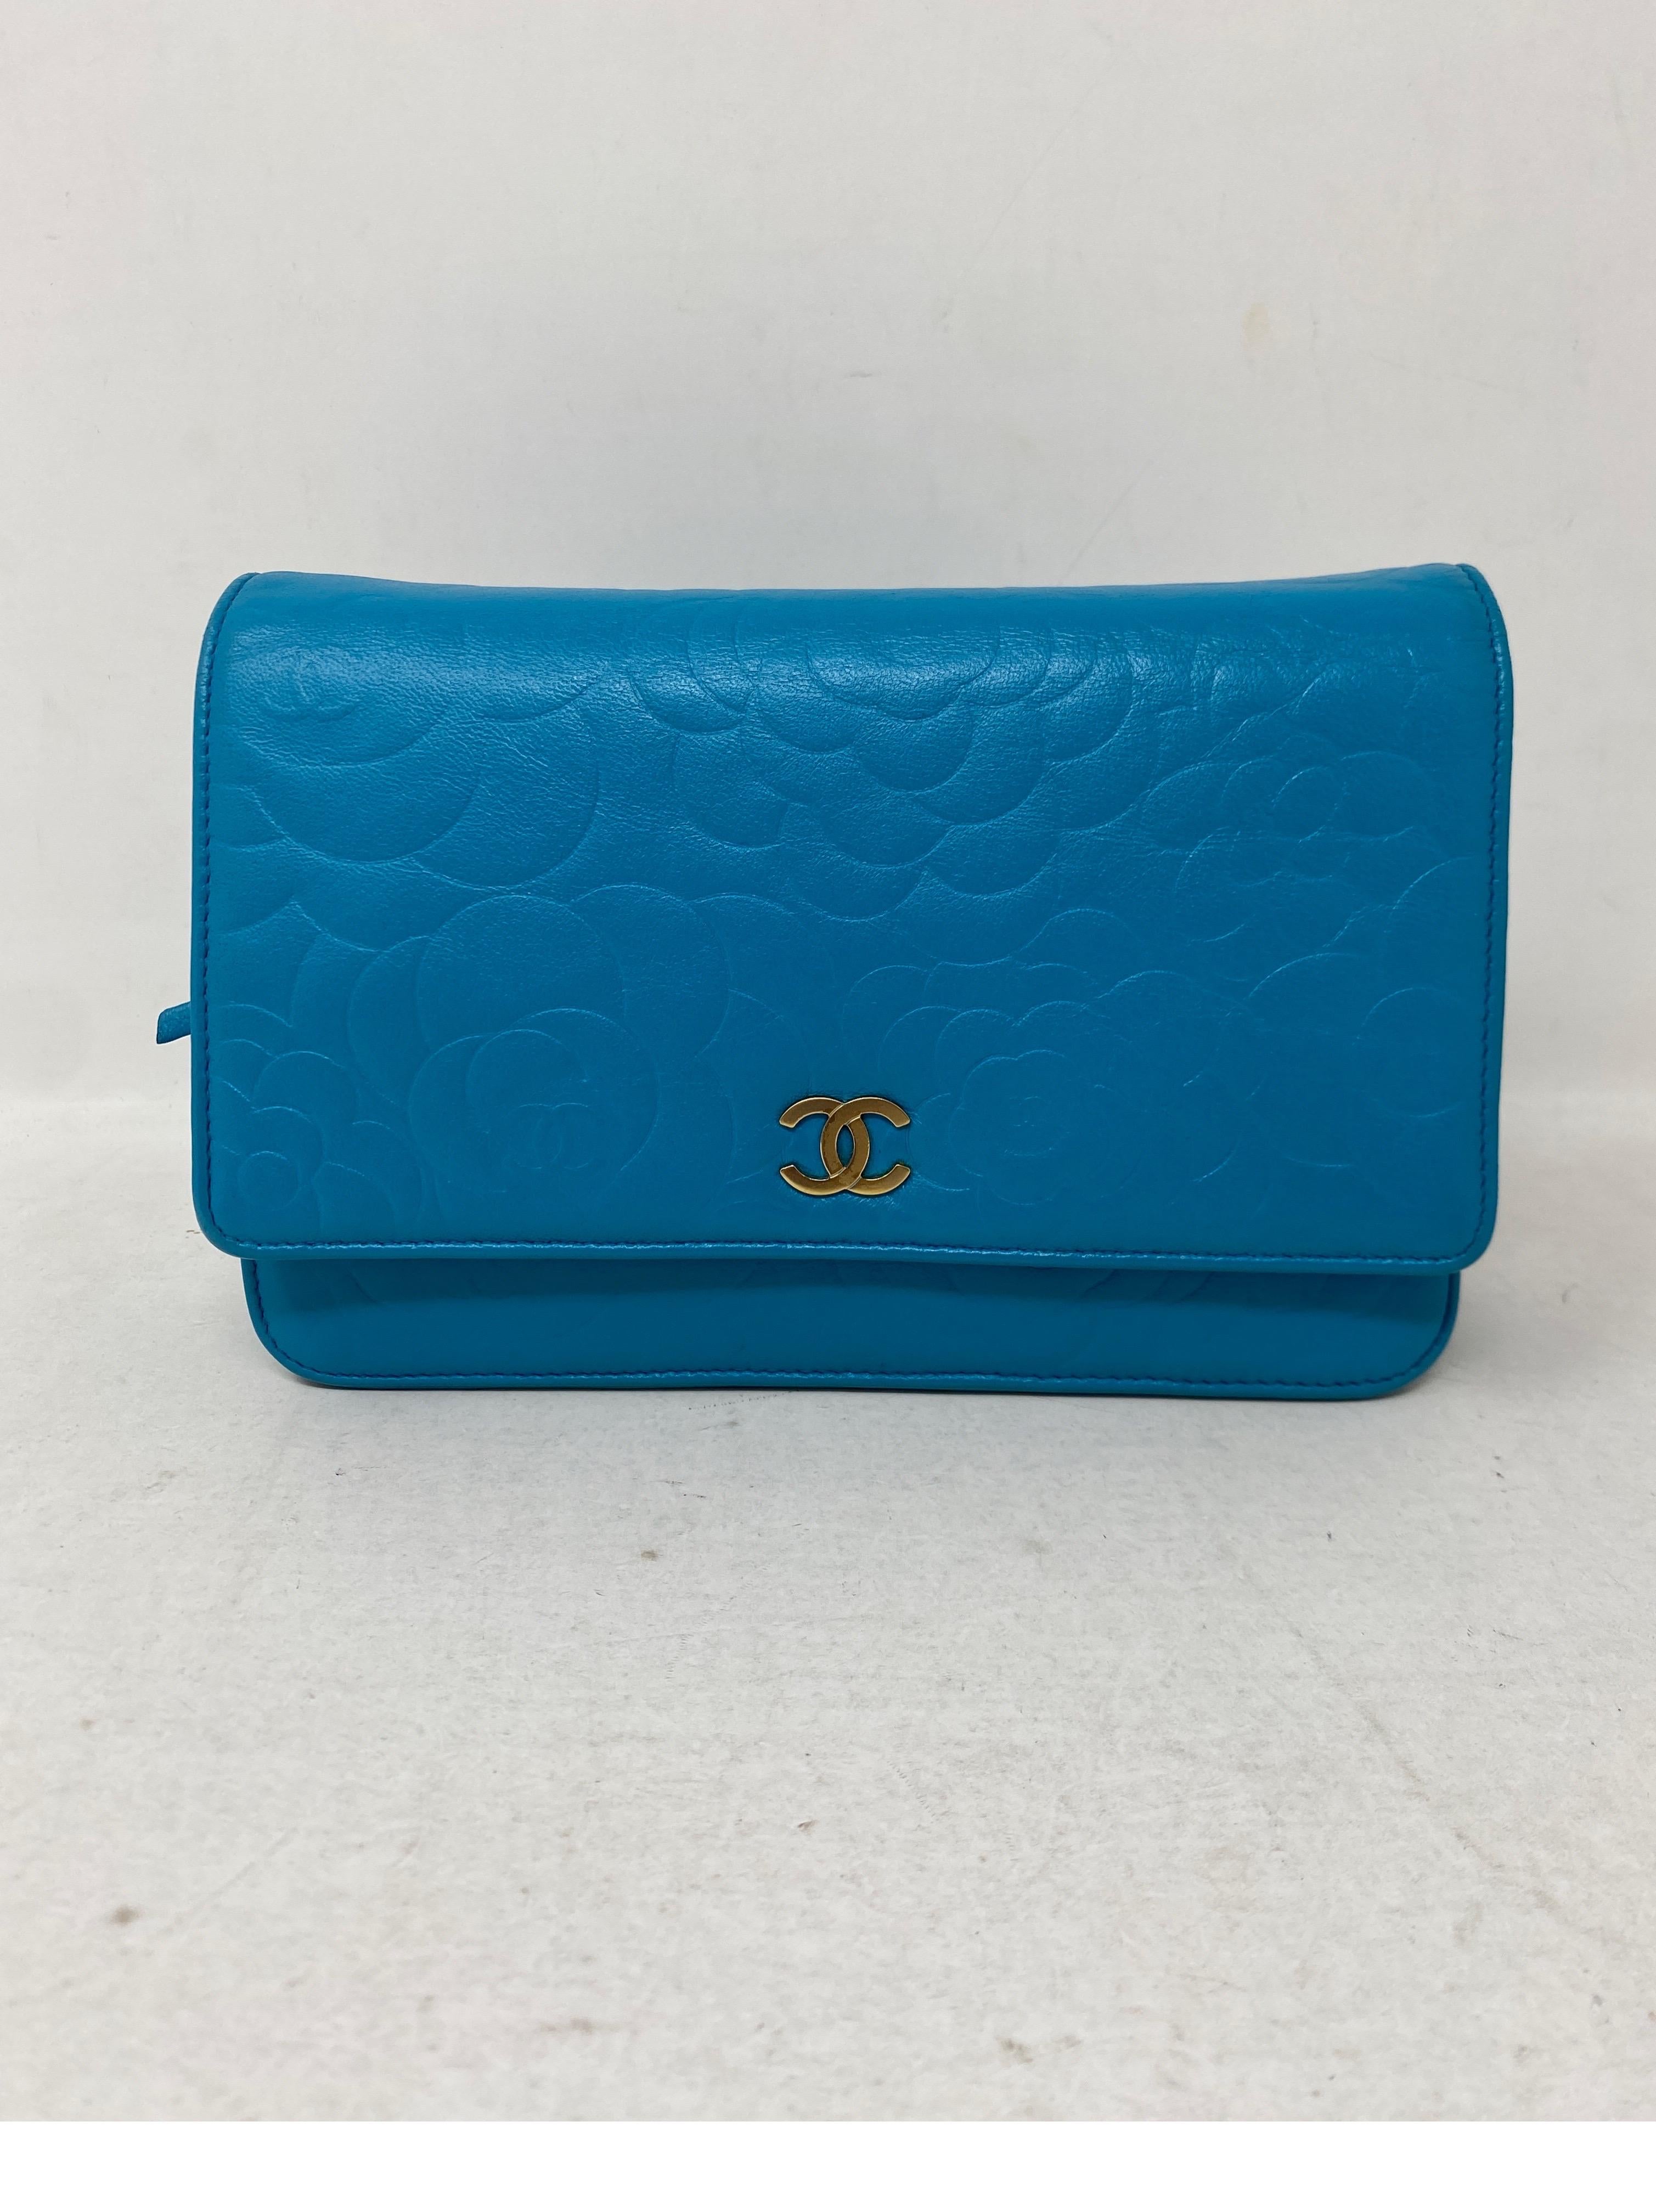 Chanel Teal Wallet On A Chain Bag. Bright turquoise teal color leather bag. Can be worn crossbody or as a shoulder bag. Can also be worn as a clutch or wallet. Multiple uses. Great condition. Interior clean. Includes authenticity card. Guaranteed